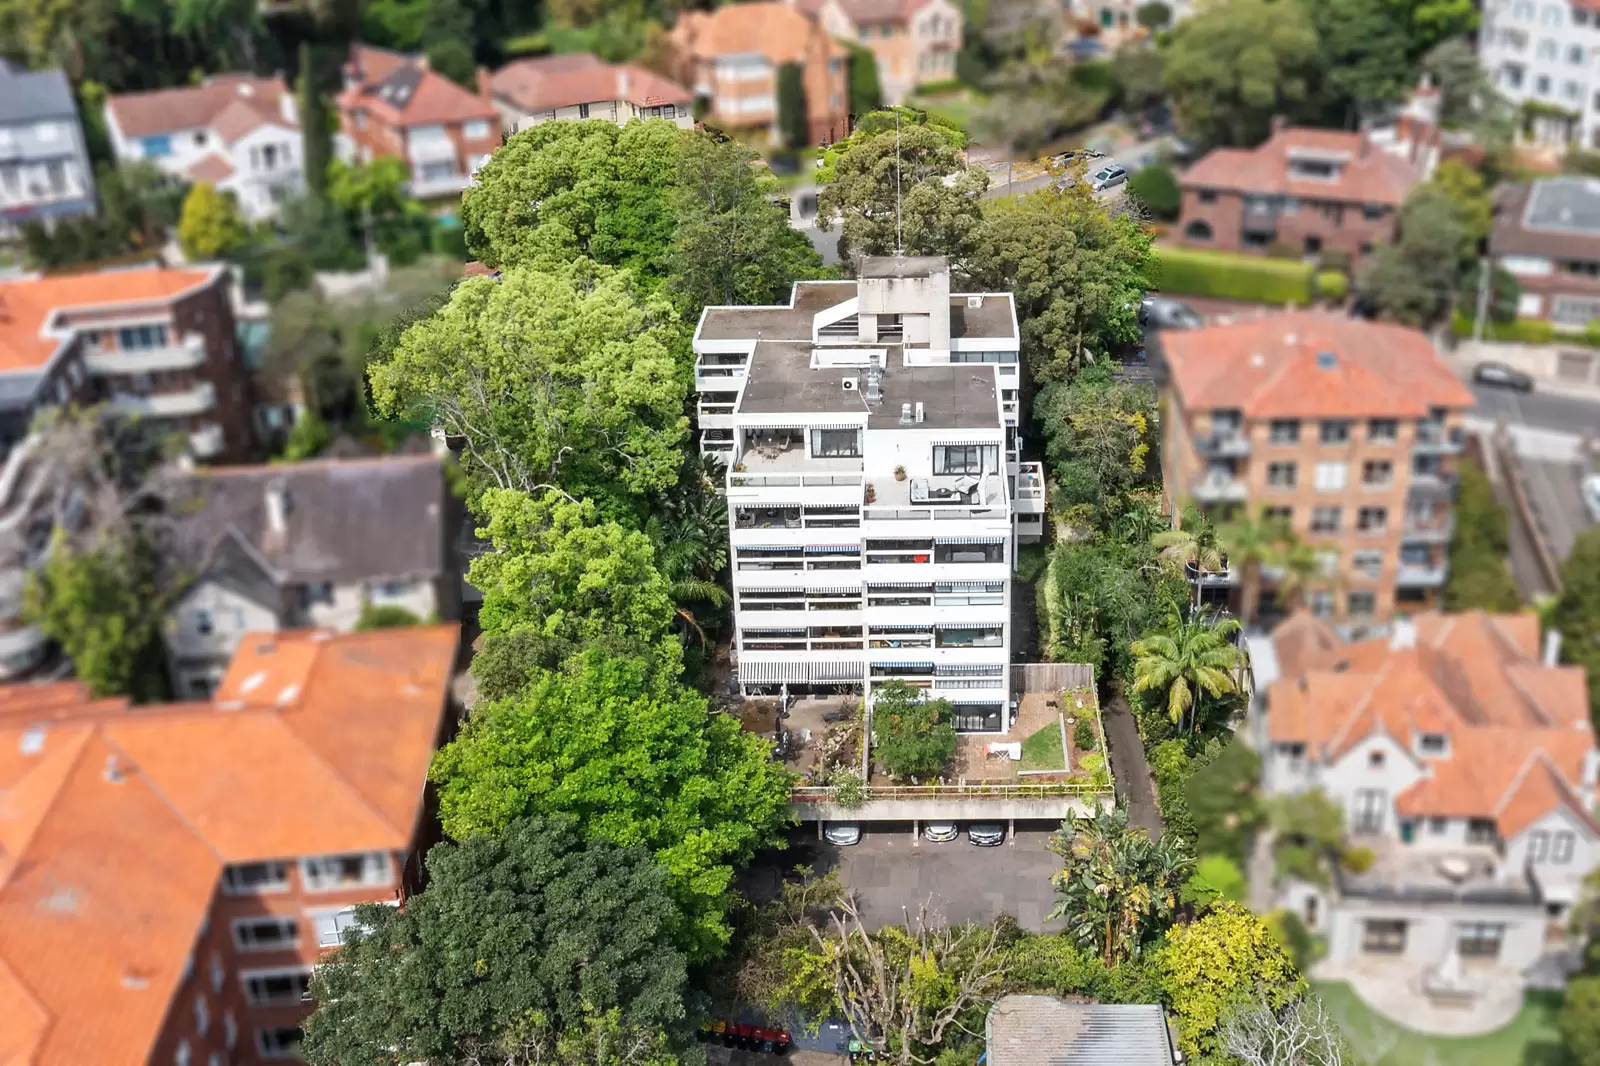 Photo #18: 52/36 Fairfax Road, Bellevue Hill - Auction by Sydney Sotheby's International Realty